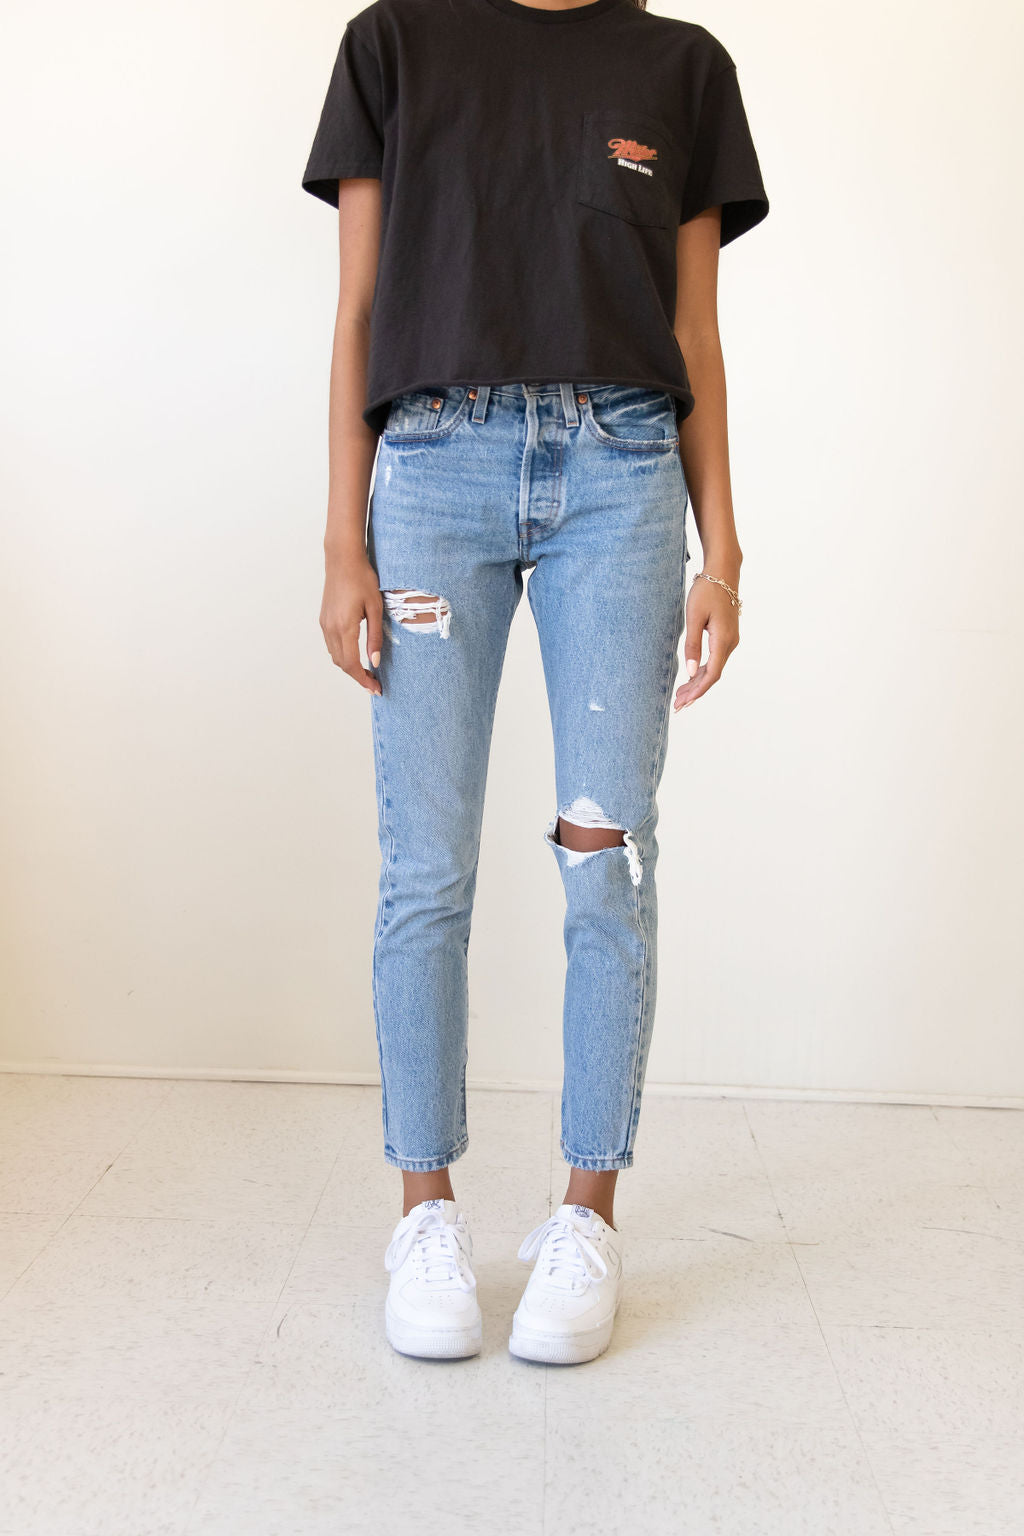 501 Skinny Jeans by Levi's